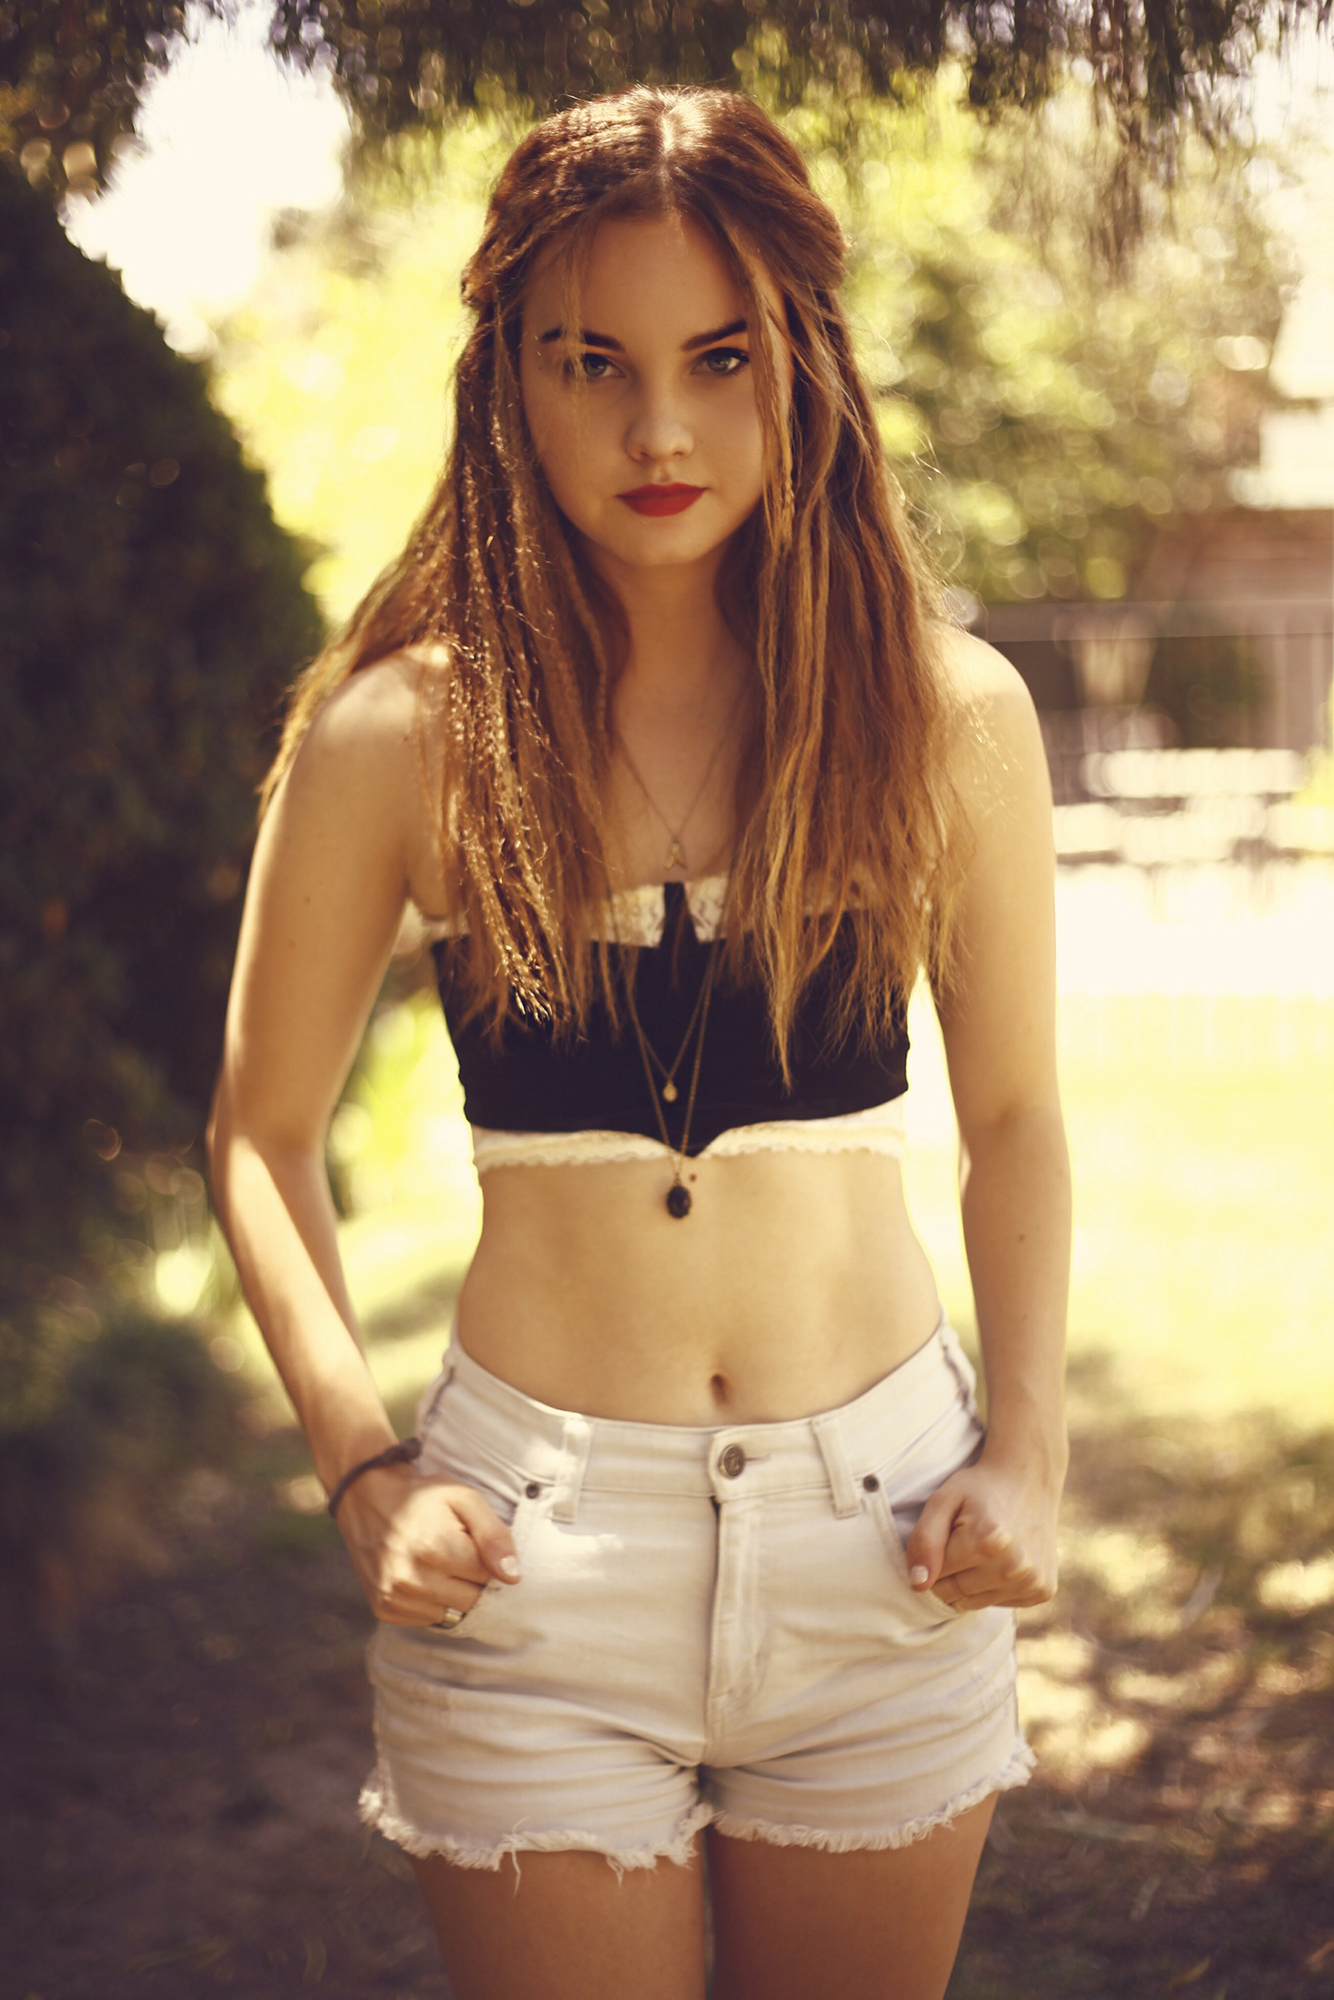 Liana Liberato Women Actress Women Outdoors Looking At Viewer Shorts Hair In Face Brunette Tube Top  1334x2000